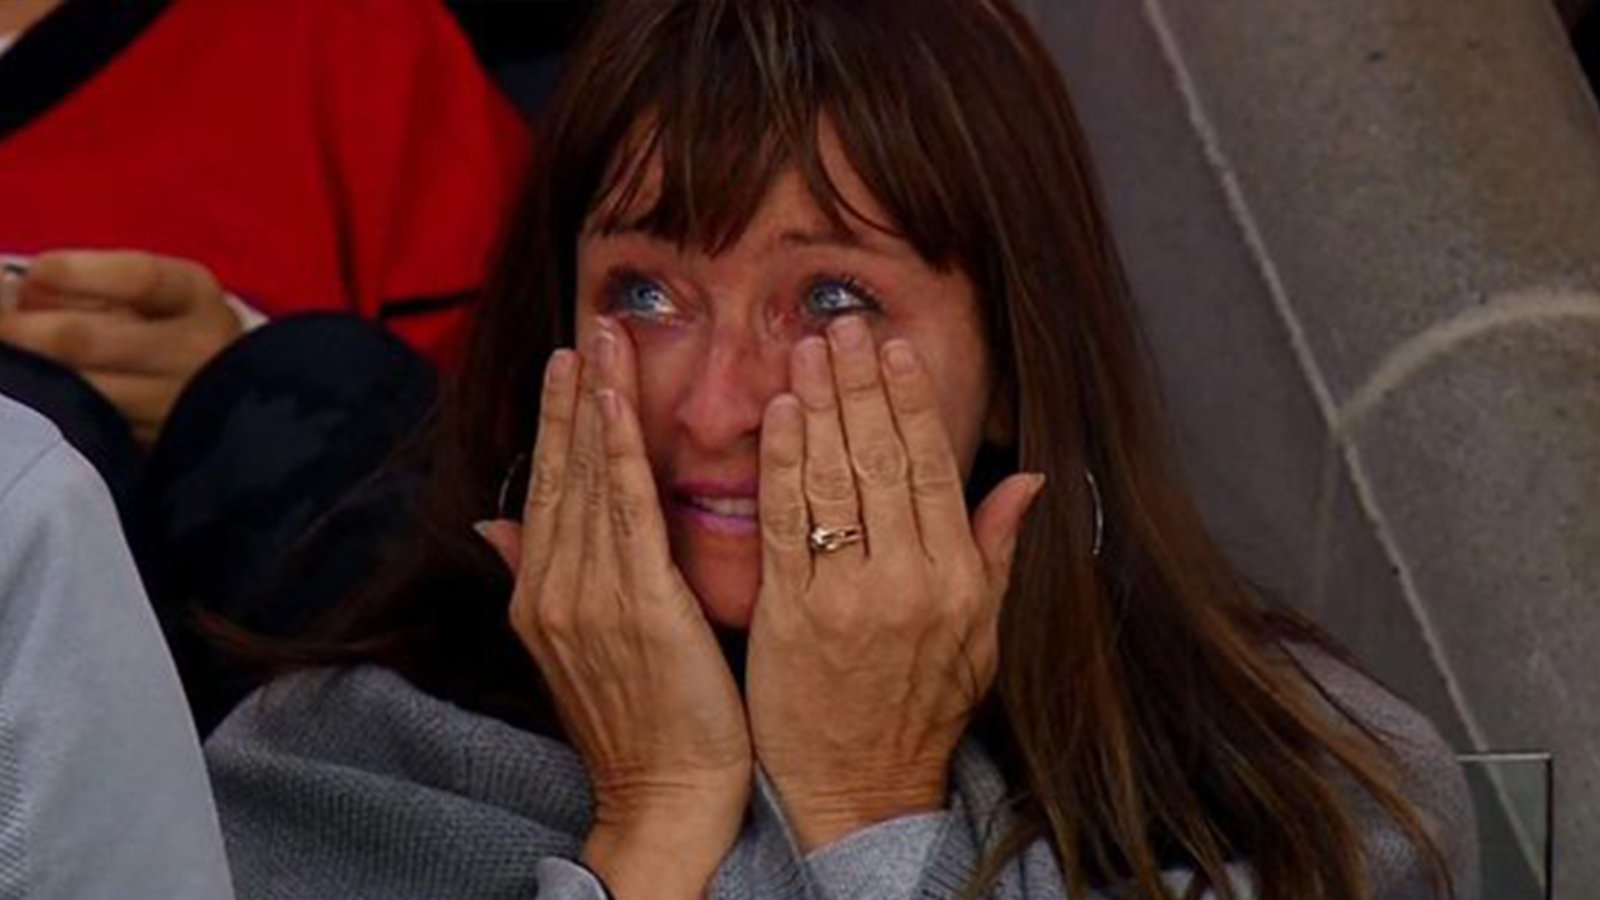 NHL rookie’s parents moved to tears as he scores his first NHL goal